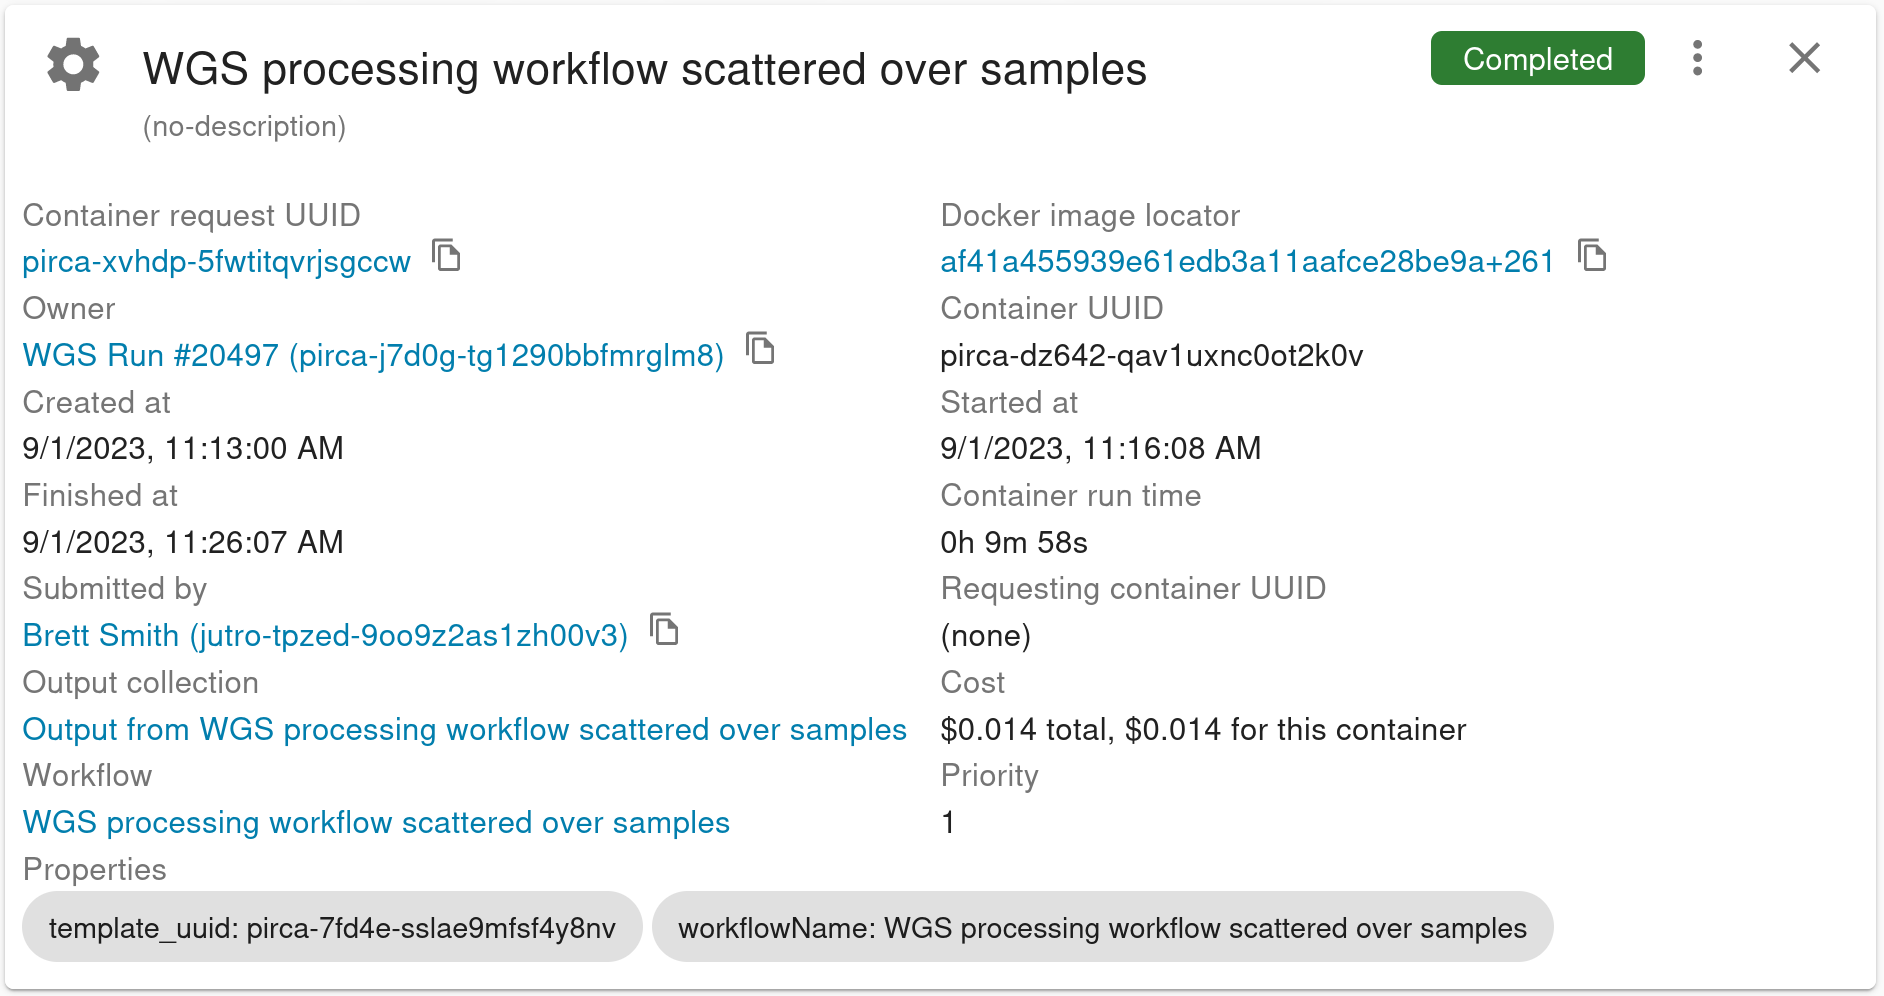 Workbench 2 screenshot that shows a completed workflow process including a single-line cost display and a link to the workflow definition